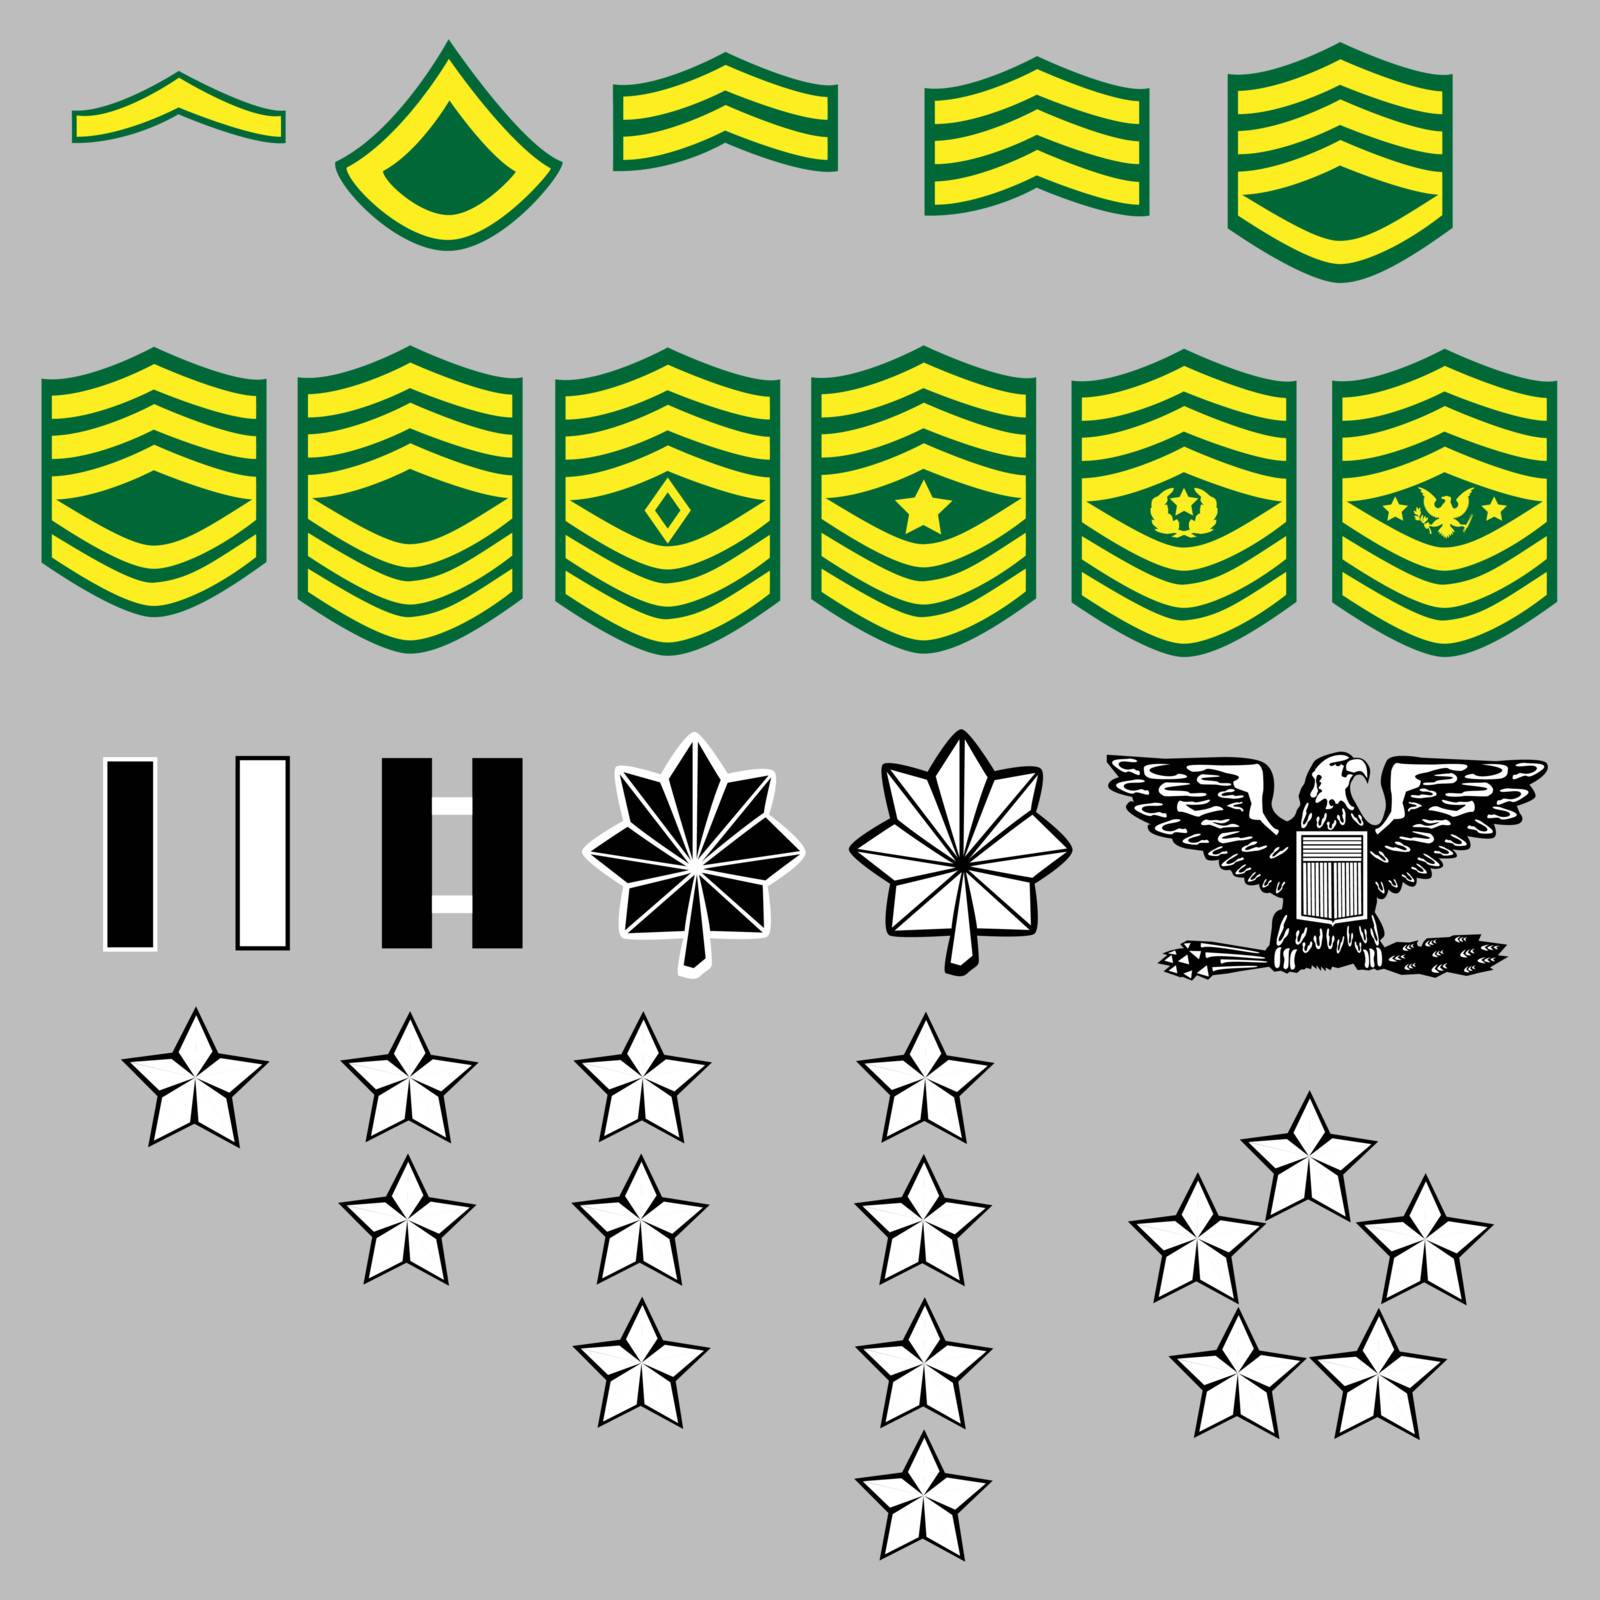 US Army rank insignia by lhfgraphics